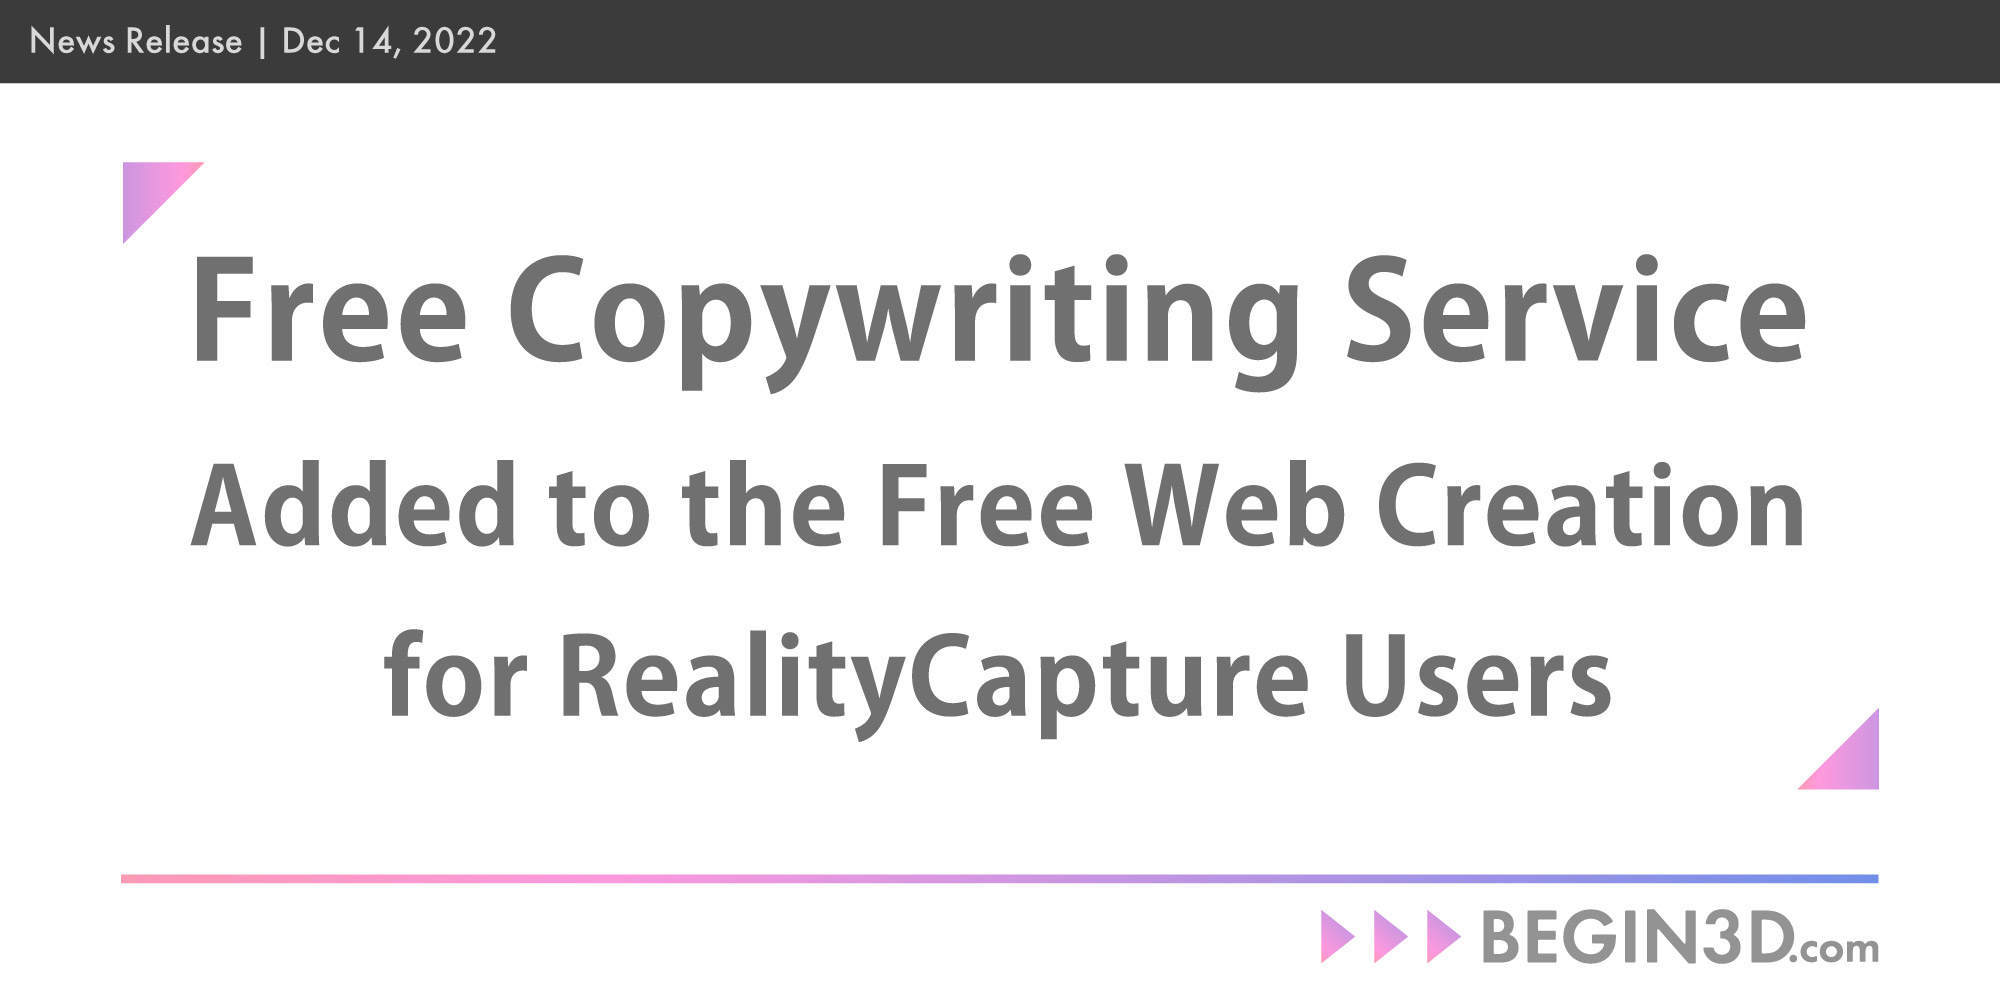 Adding Copywriting Services to the Free Creation of Dedicated Web Pages for RealityCapture Users